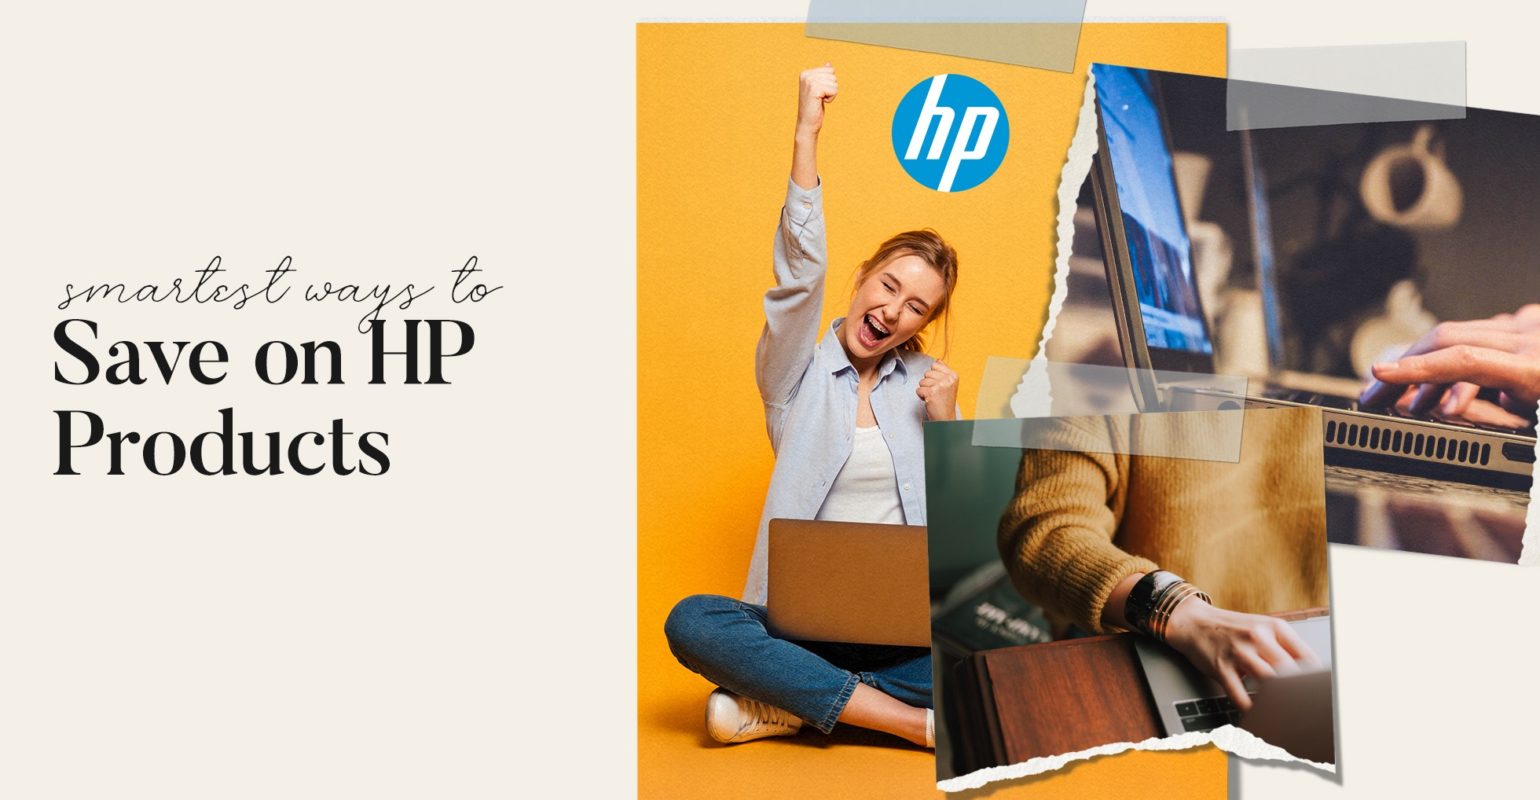 Smartest Ways to Save on HP Products